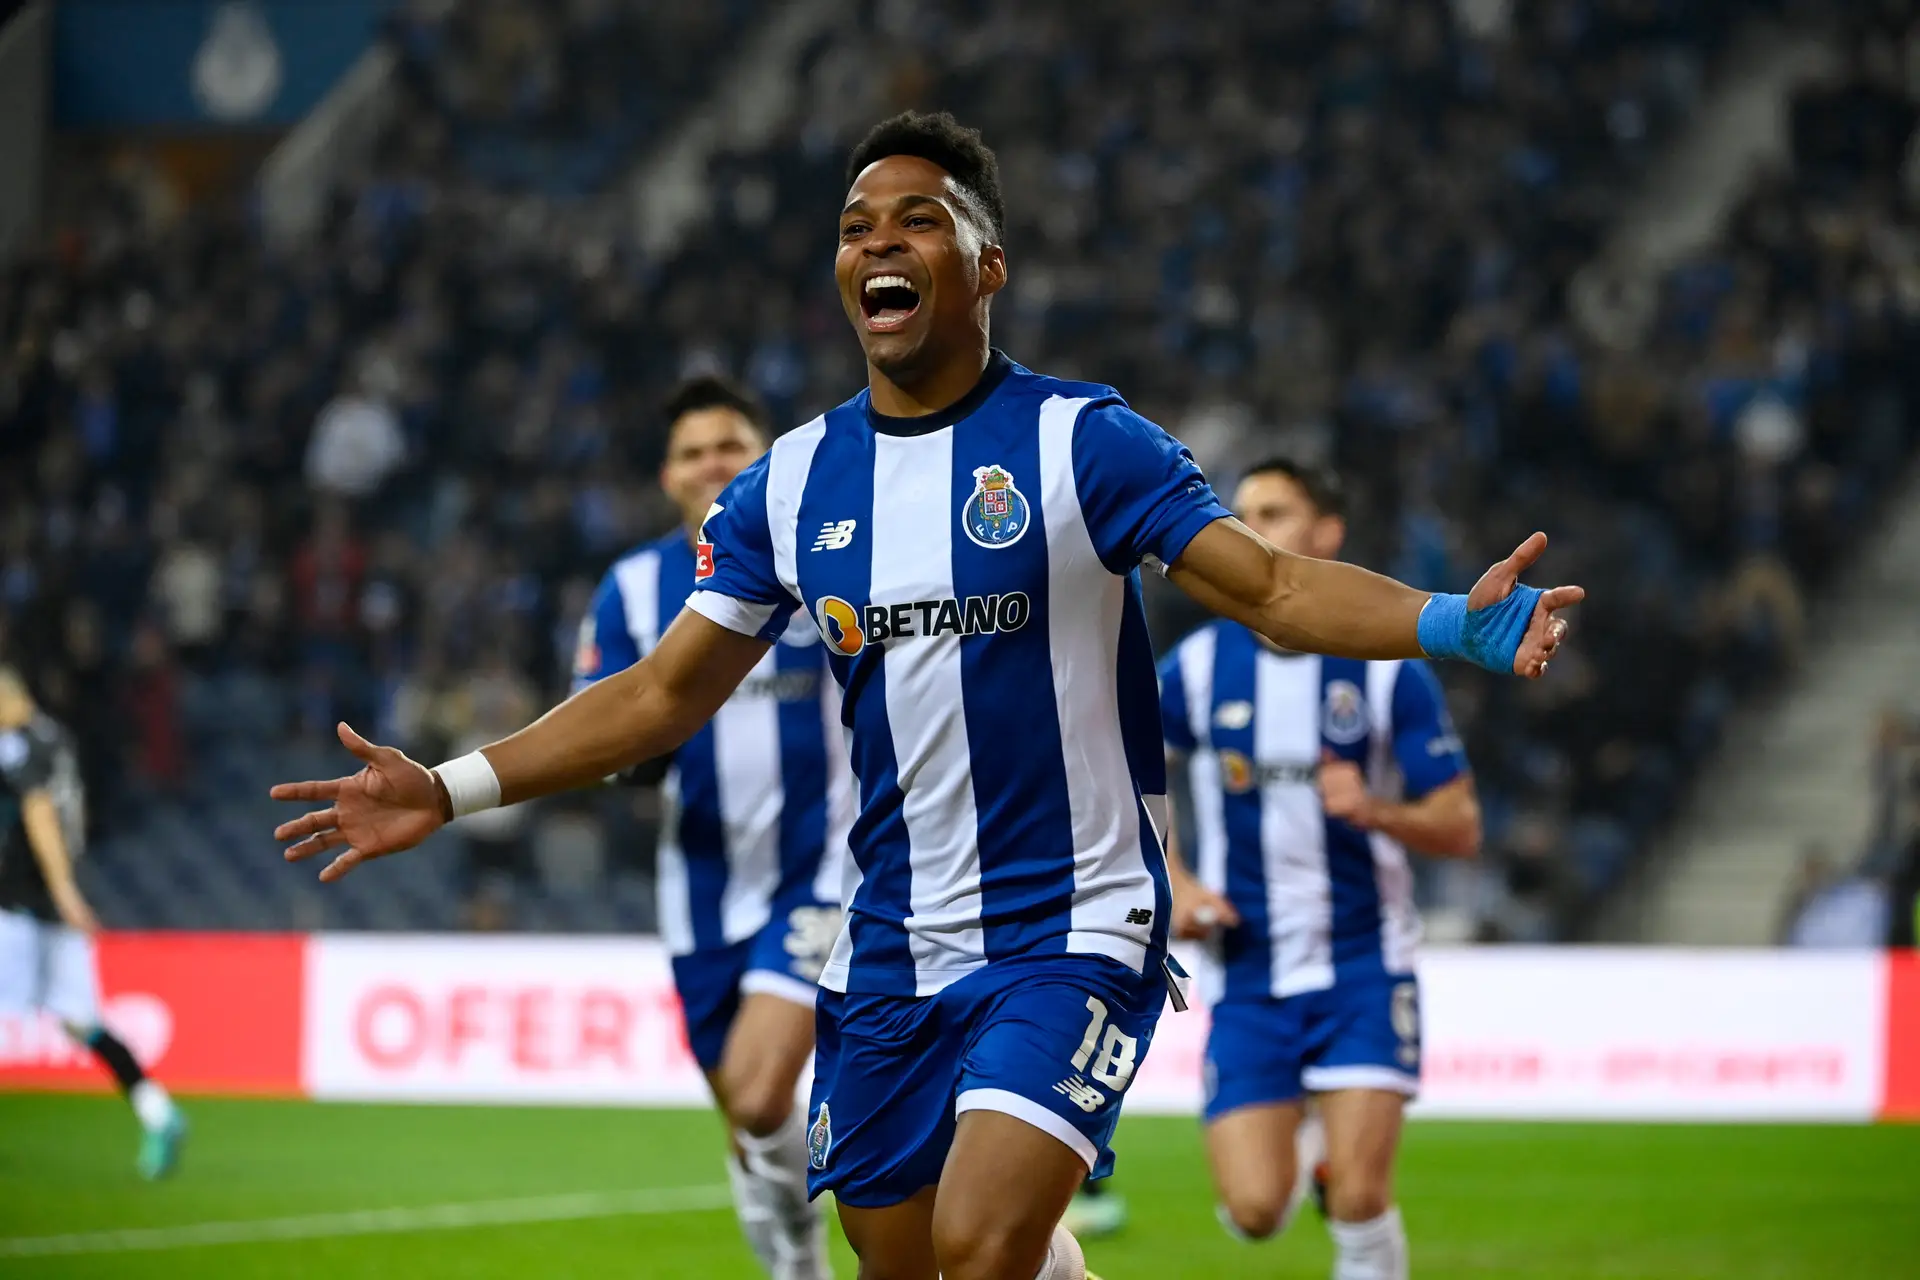 Juventus have added another name to their target list to reinforce the wings, as their scouts were in London Brazil vs England to watch Wendell.